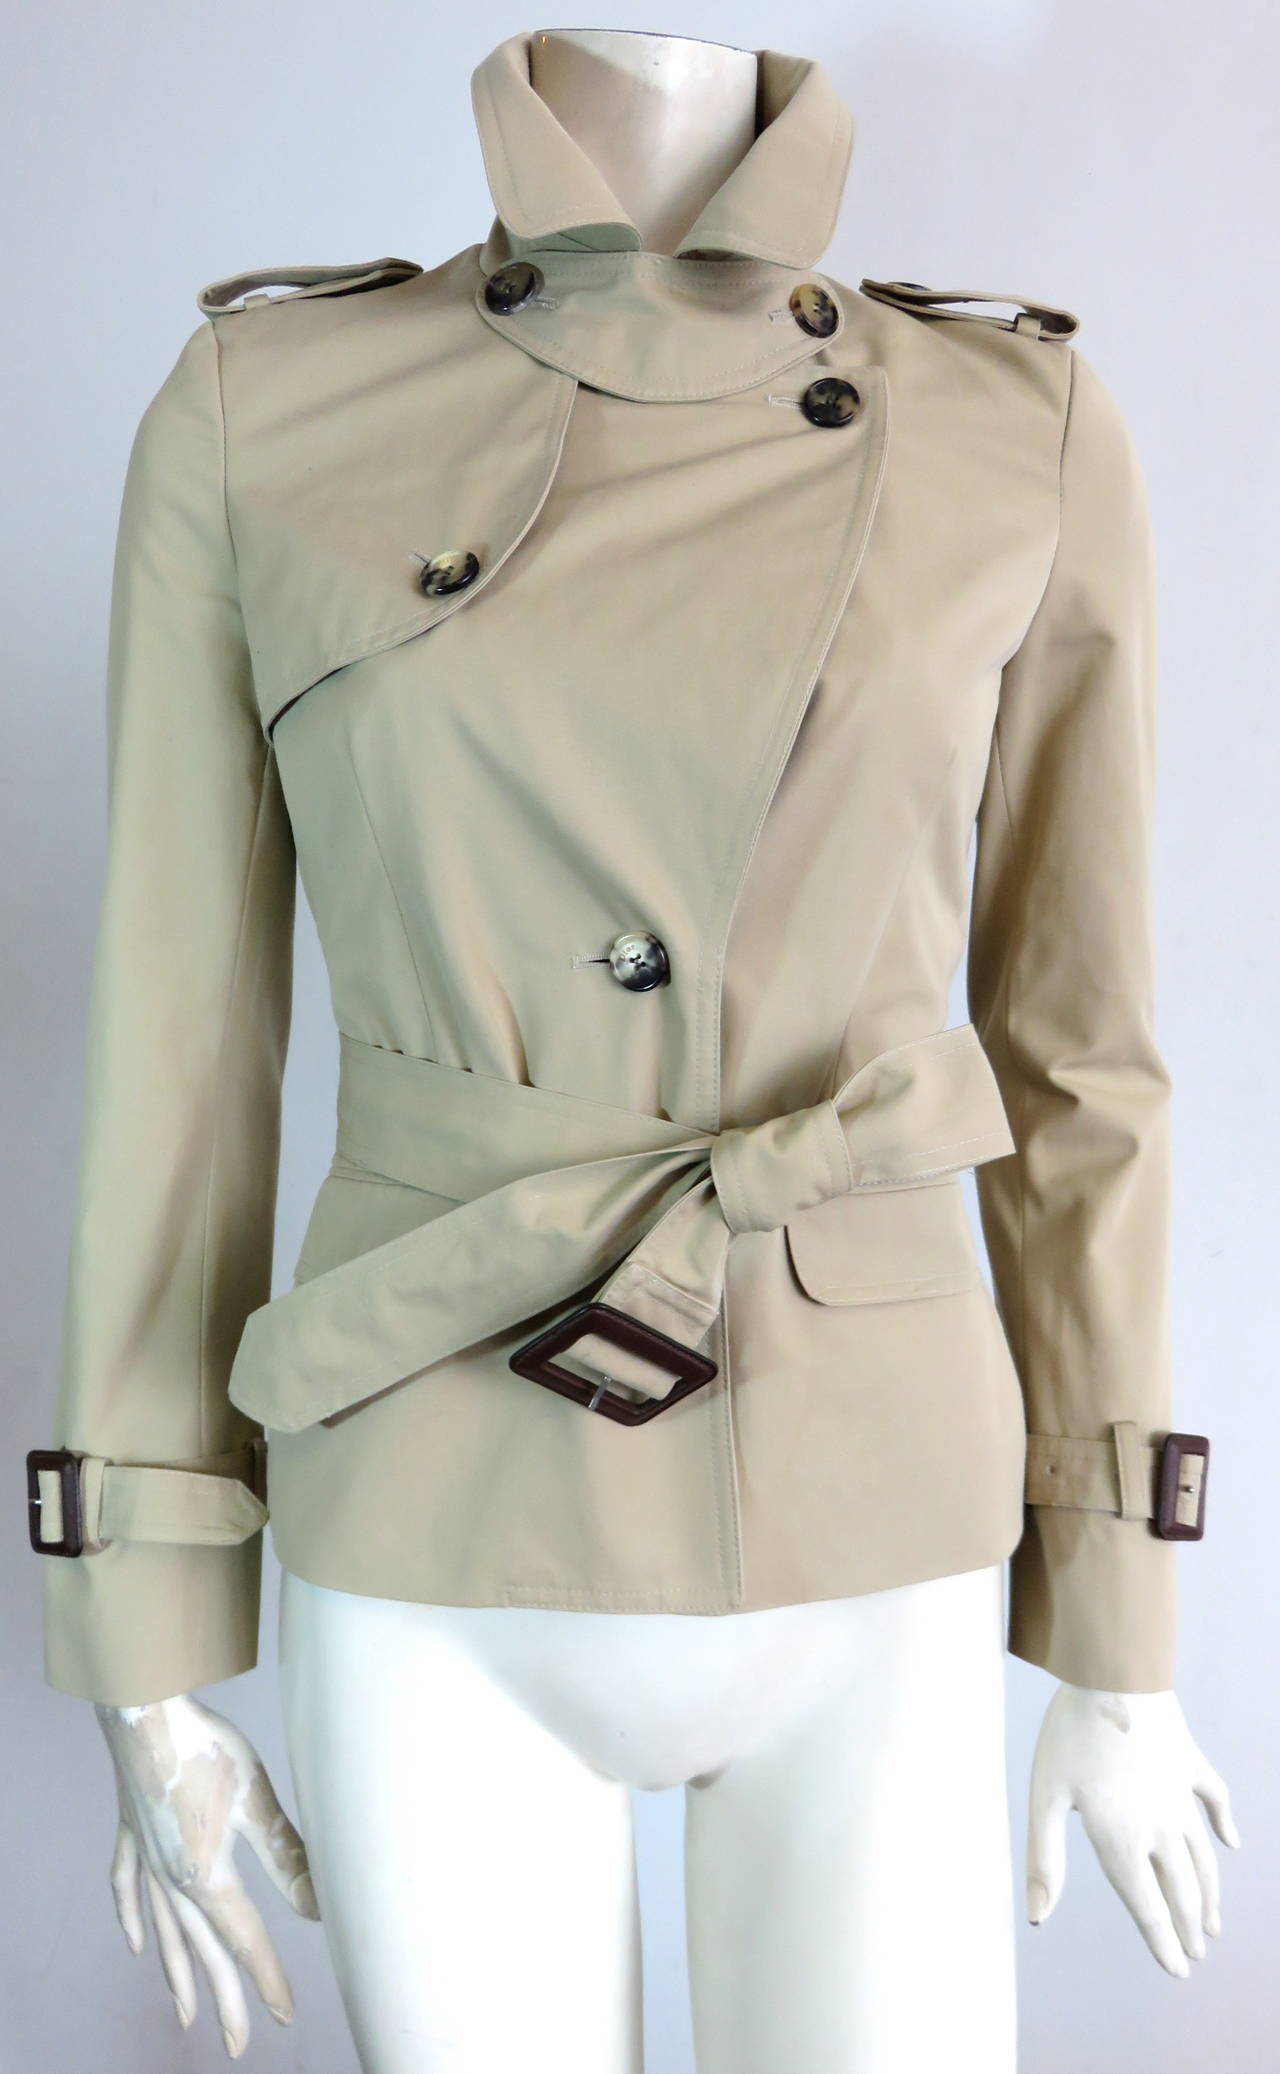 Never worn, CHRISTIAN DIOR by John Galliano cropped, cotton trench jacket.

Beige, compact woven, cotton shell fabric with silk, body lining.

Adjustable, dark brown, leather belt buckle hardwares at cuffs, and waist belt.

Logo engraved, horn